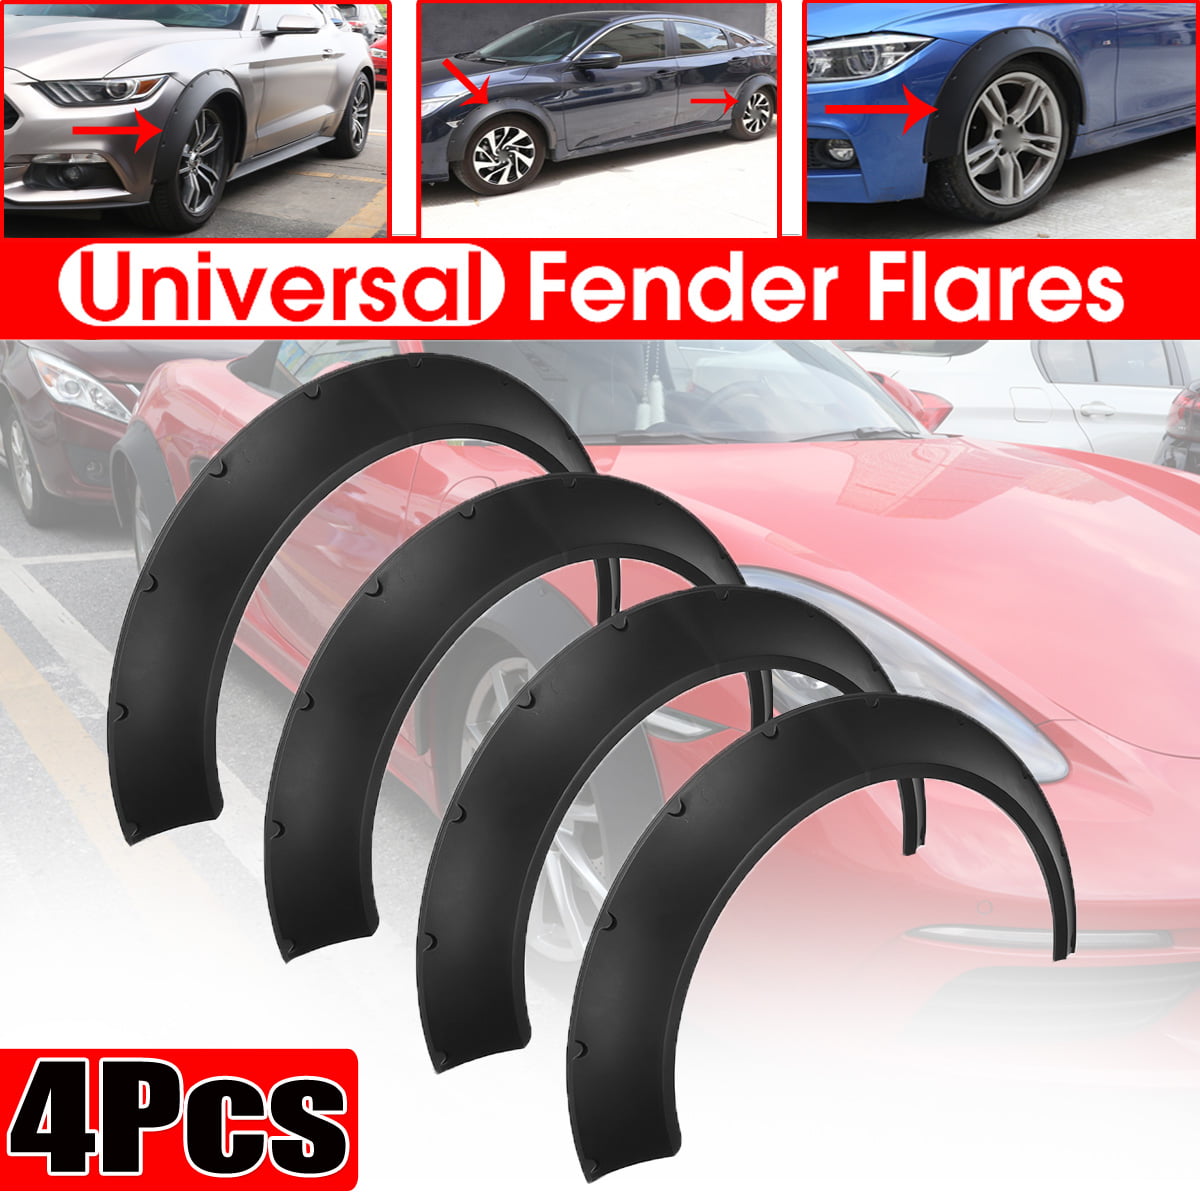 4PCS Fender flares For Honda Civic FG Extra Wide Body kit Wheel Arches 3.5"/90mm